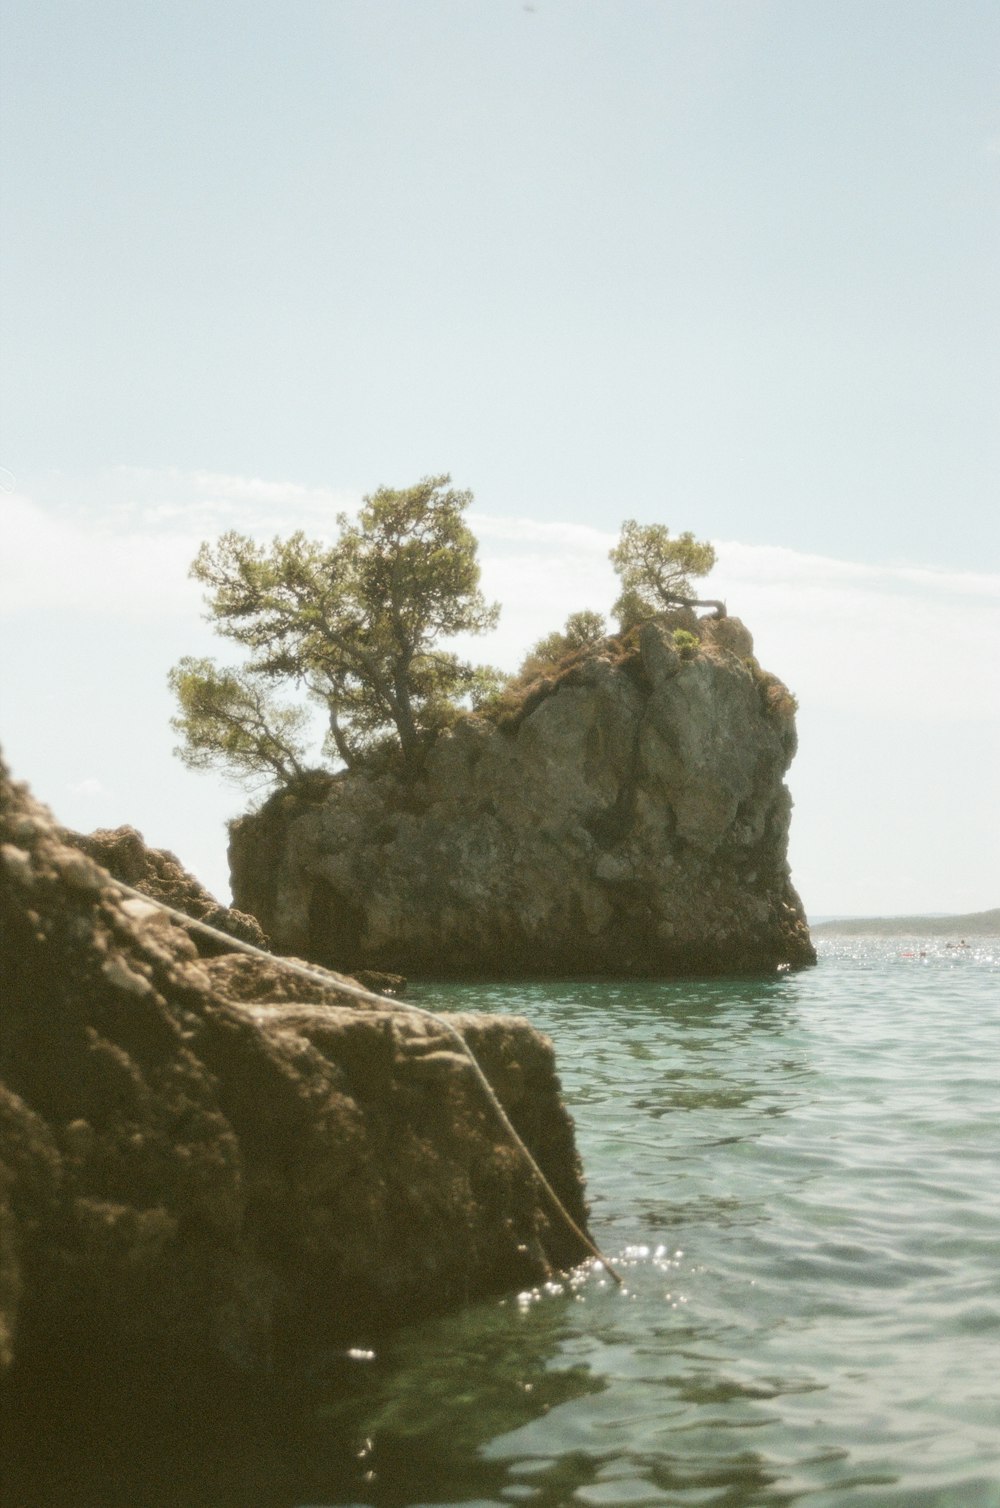 a rock outcropping in the middle of a body of water